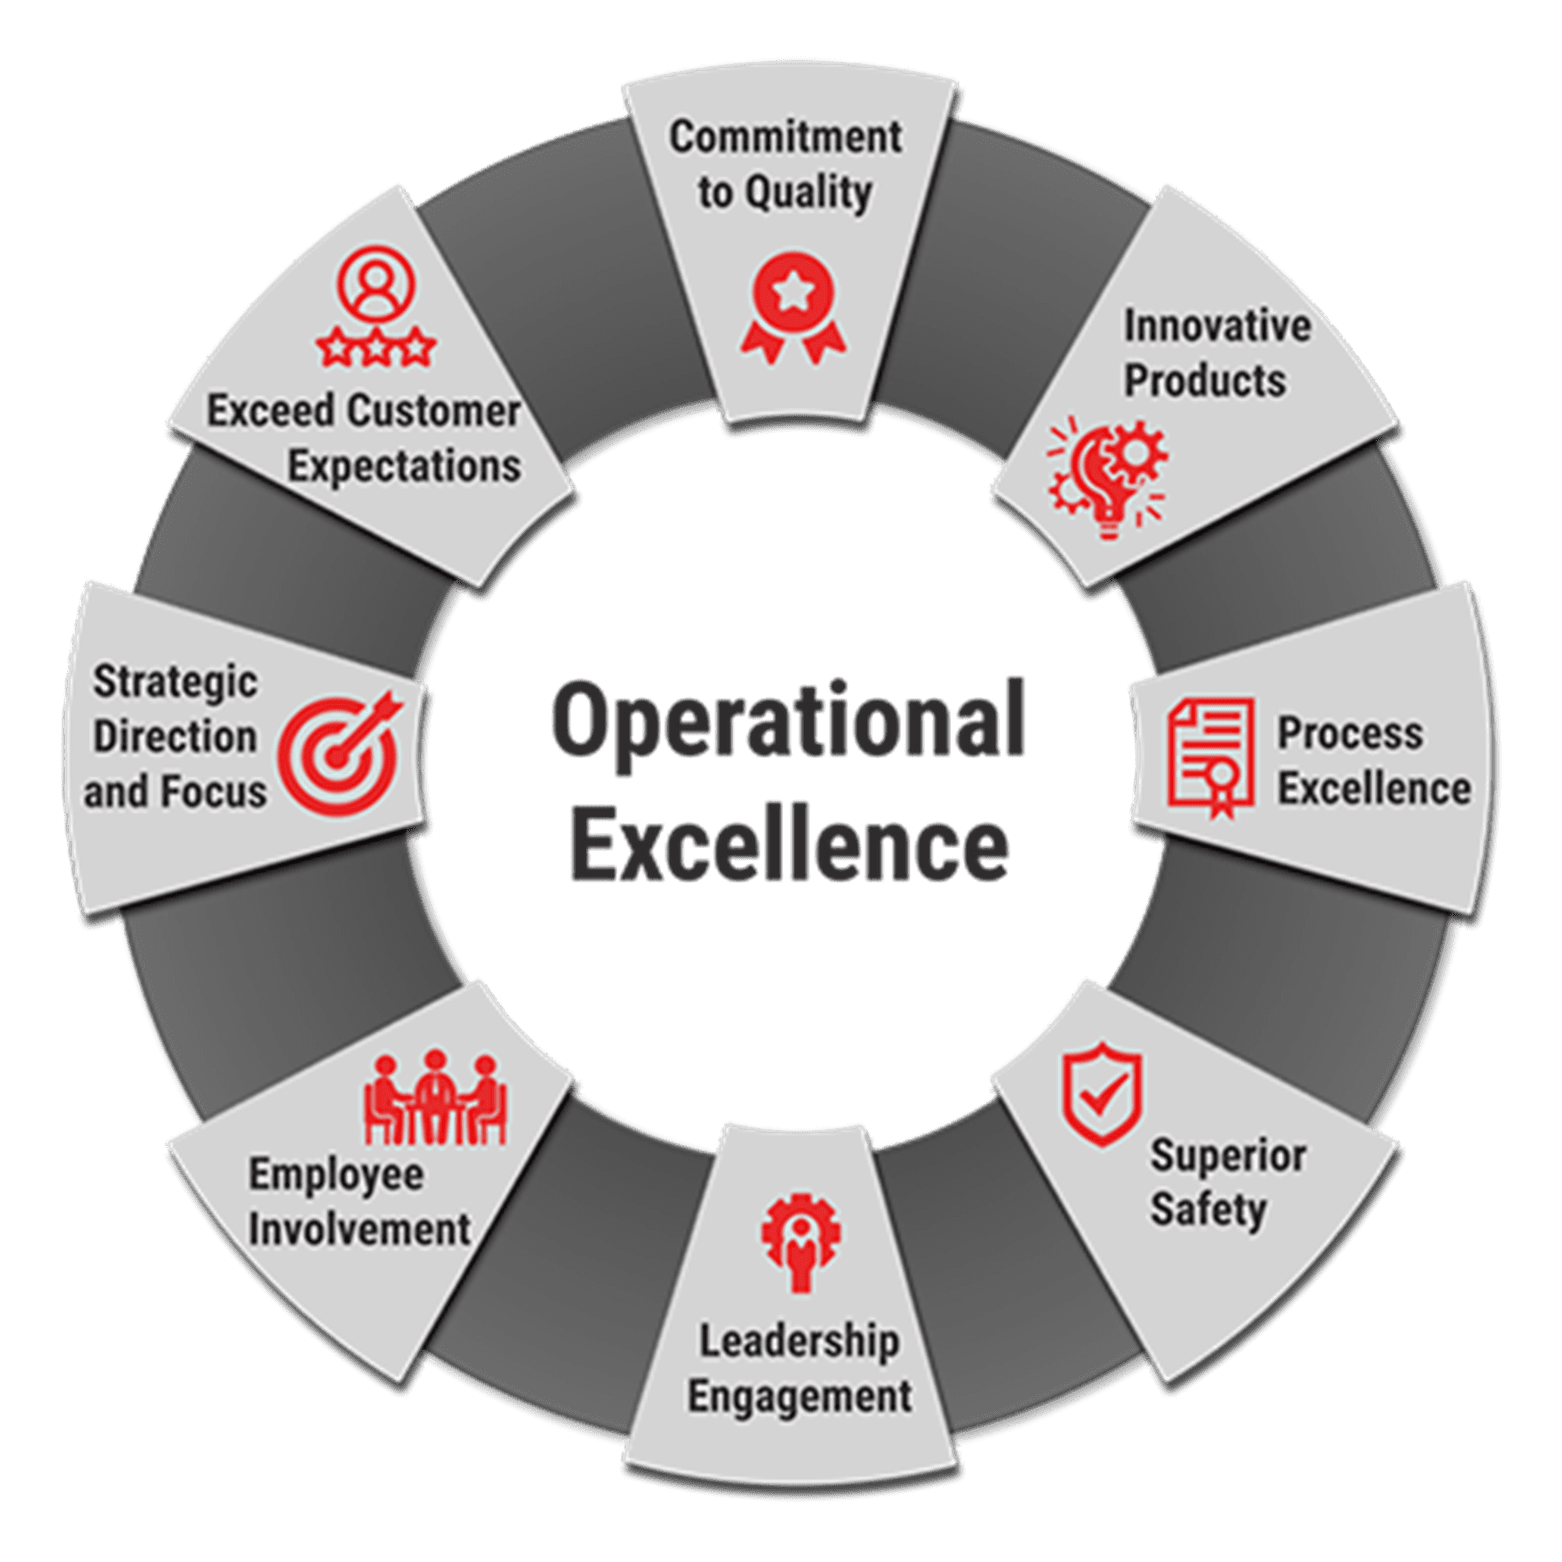 What is Operational Excellence?